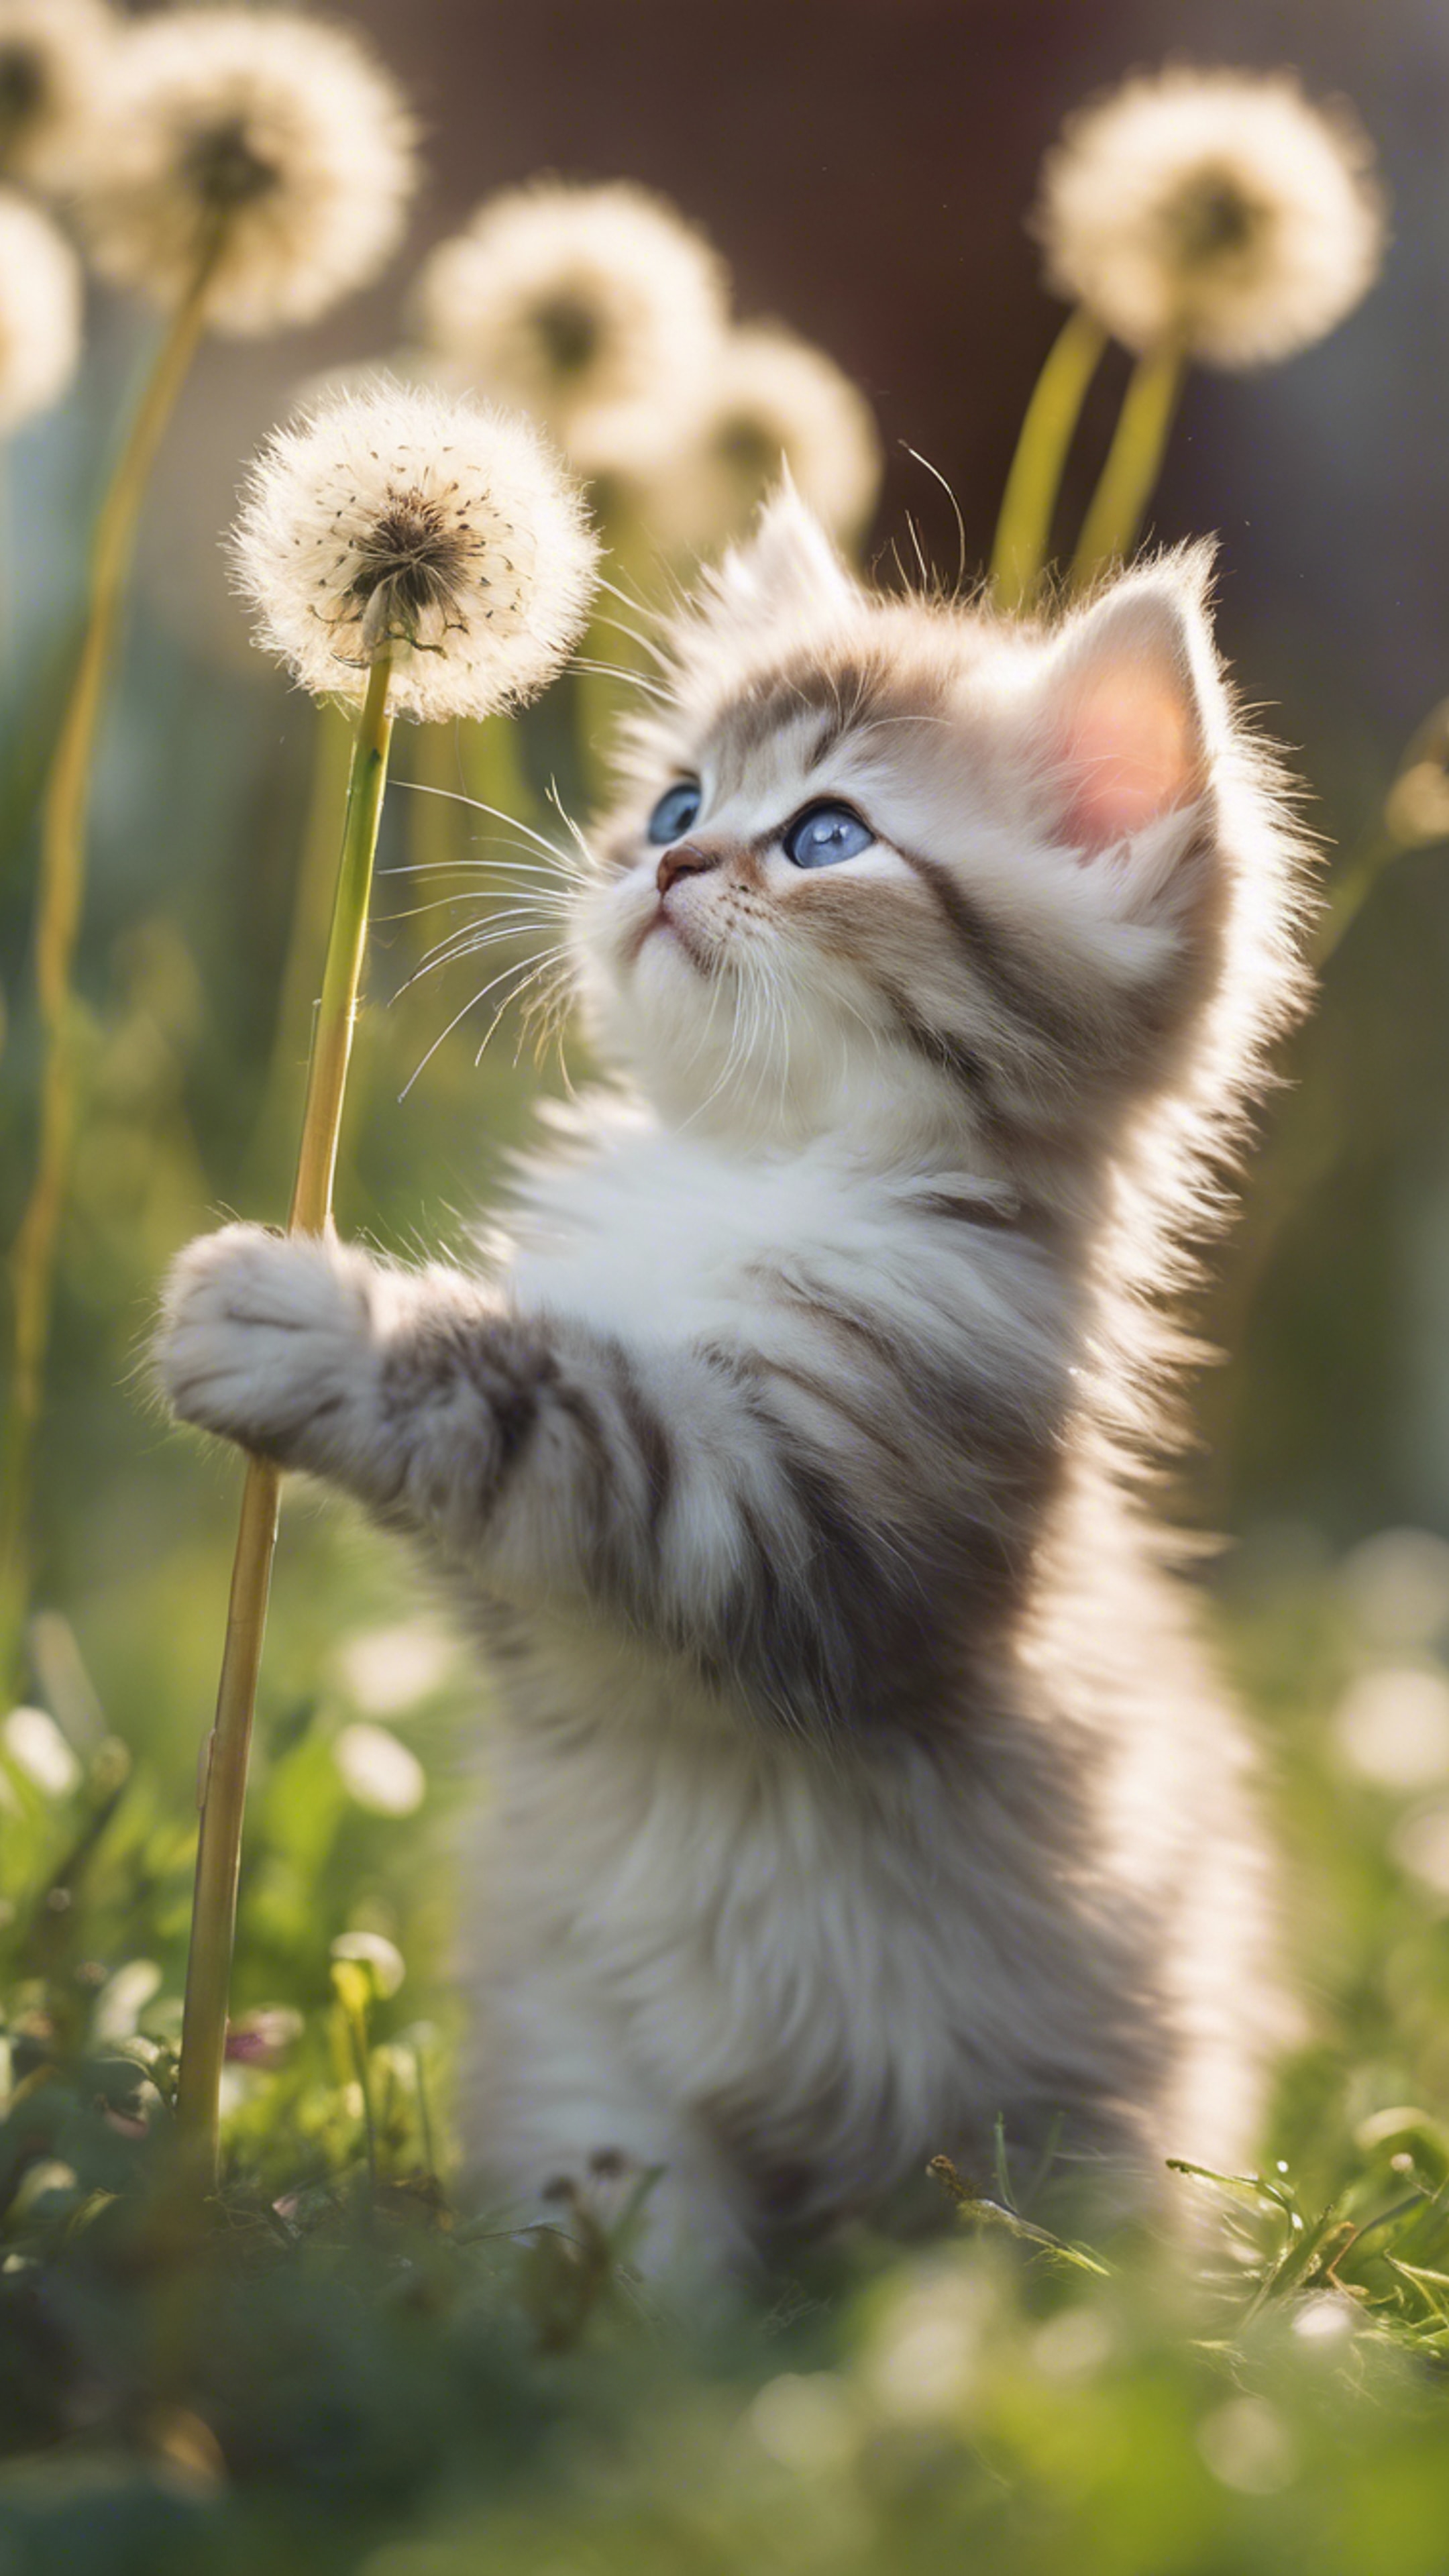 A curious Persian kitten playfully batting at a dandelishion puff in the midst of spring bloom. Tapeta[a1f5779e66044a4f83a1]